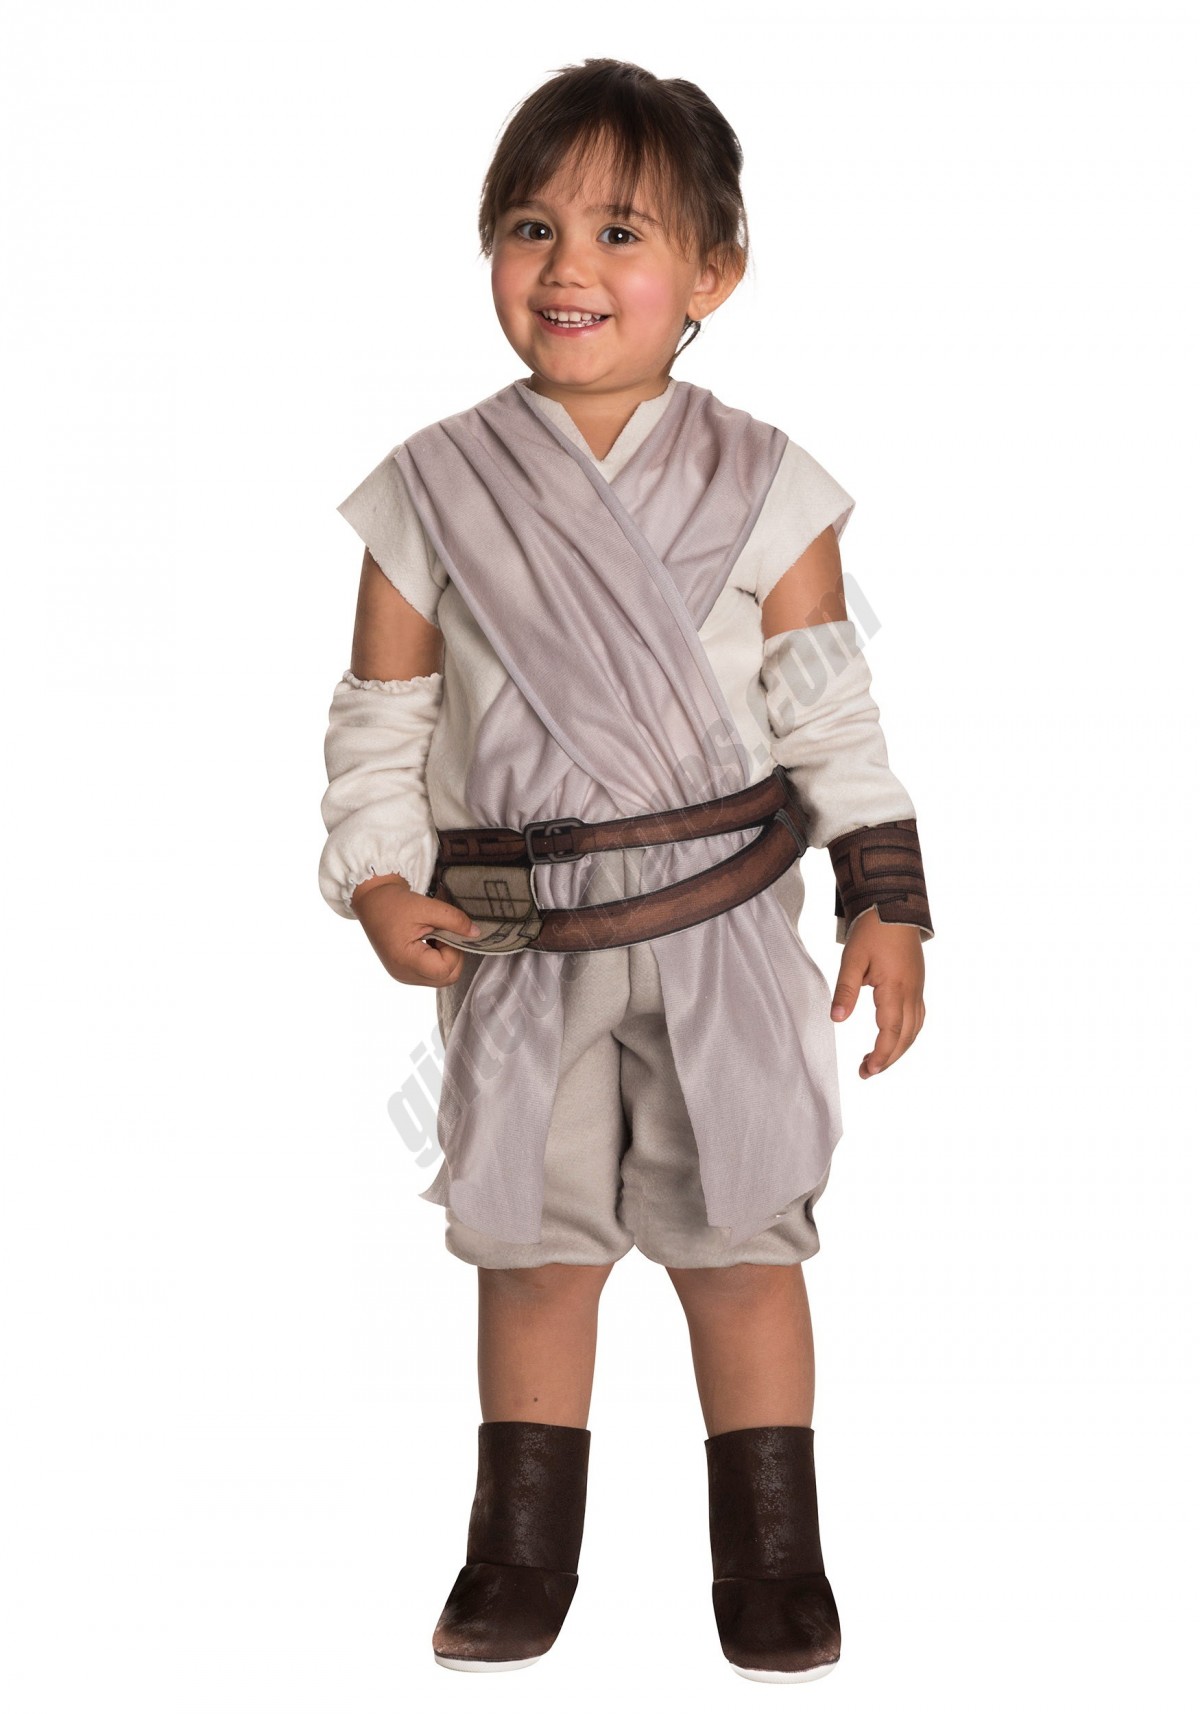 Toddler Girls Star Wars The Force Awakens Rey Costume Promotions - -0